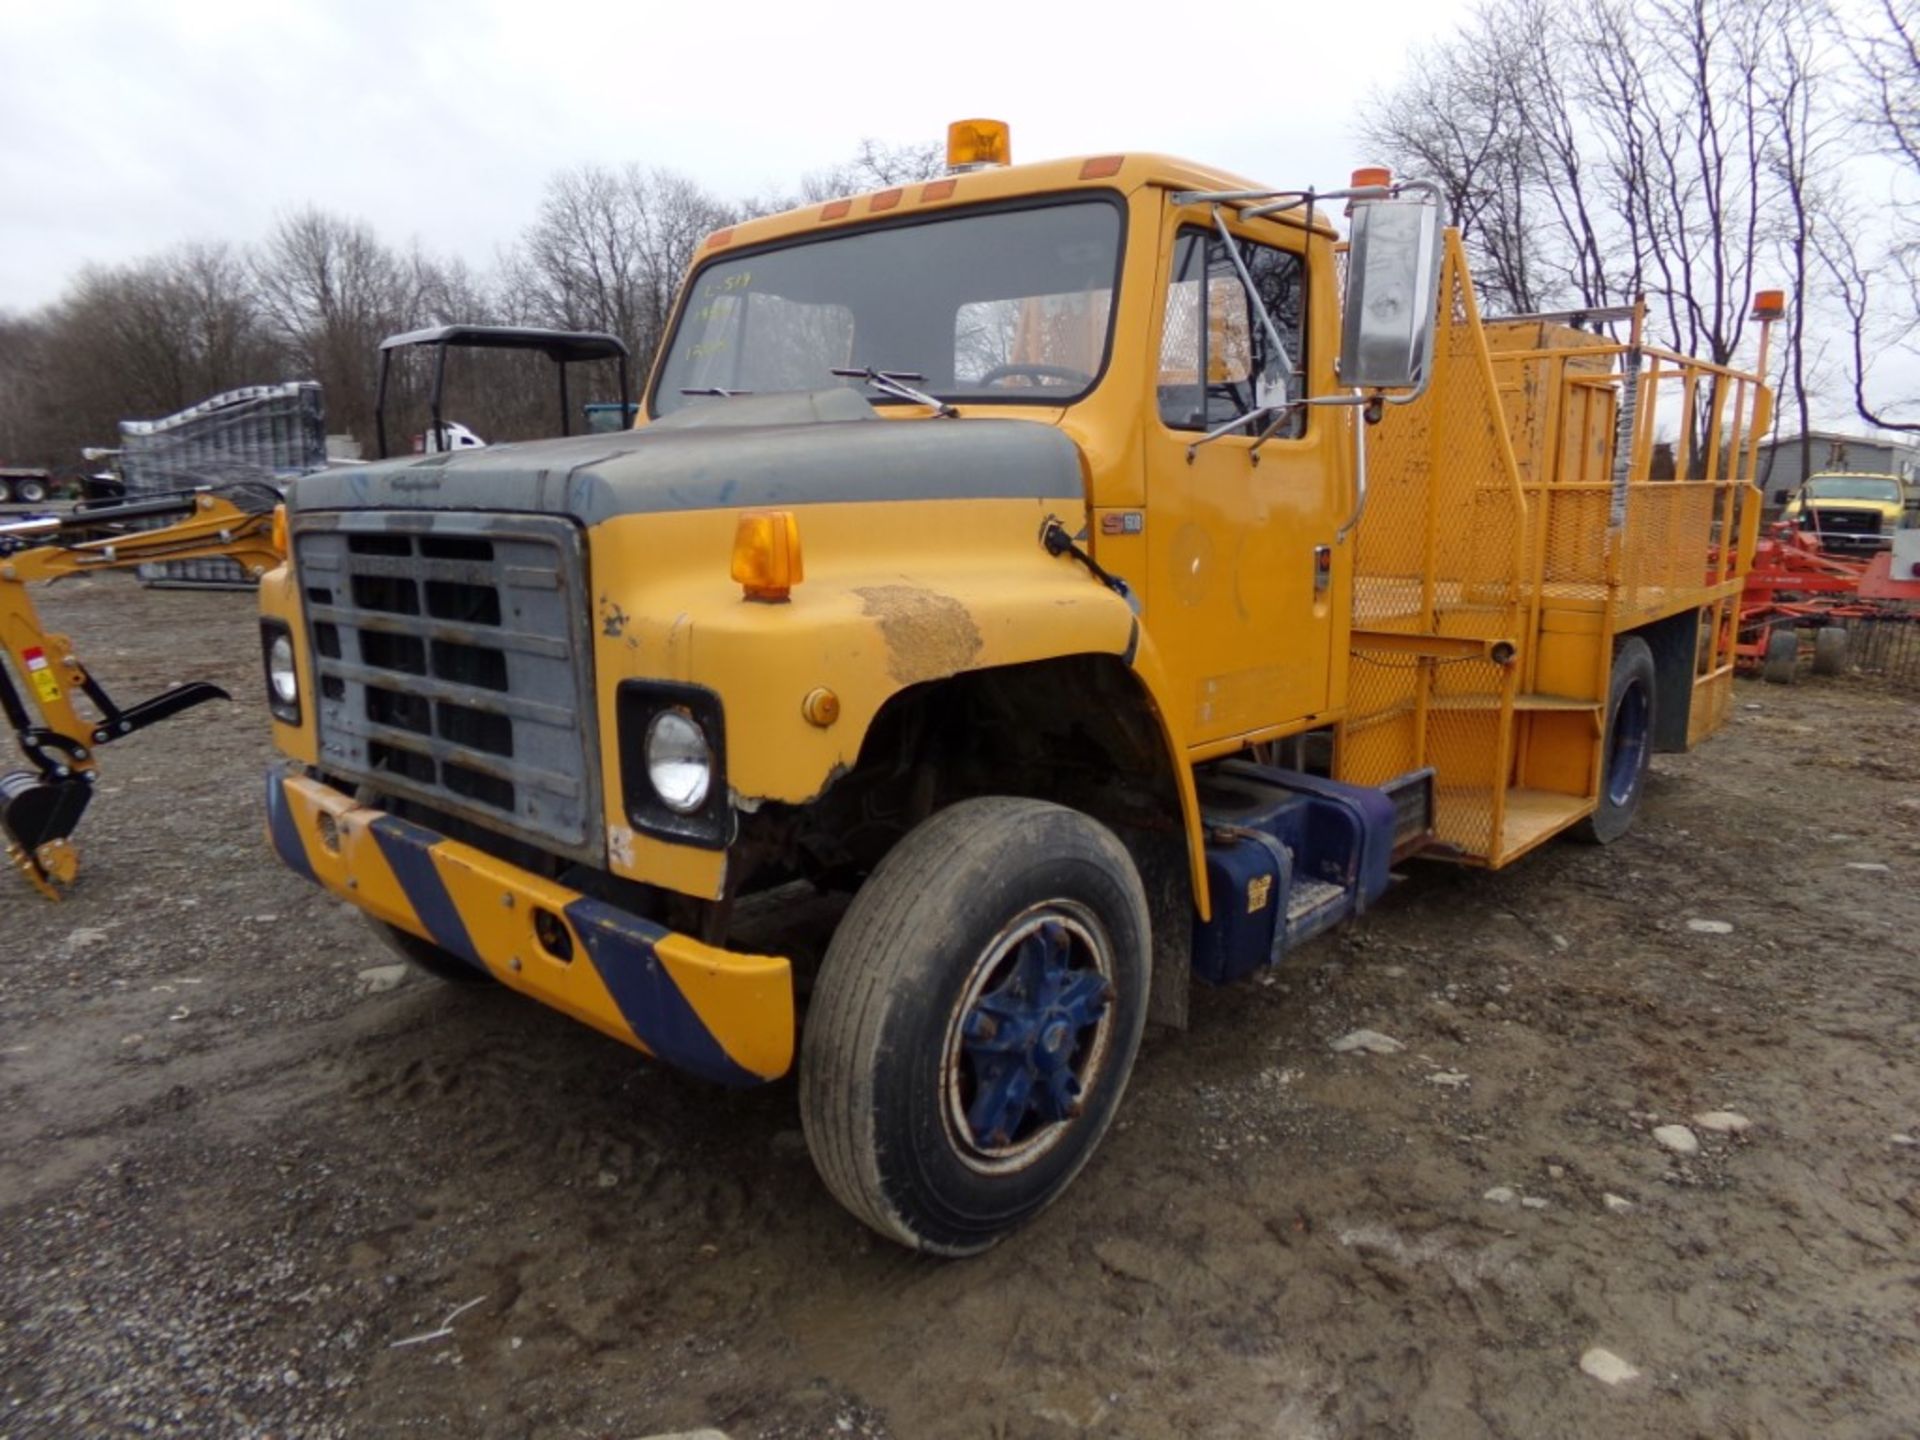 1989 International S-1600 Reg Cab, Utility Truck, 120,272 Miles, 5 Speed Manual, Used As Cone Truck,